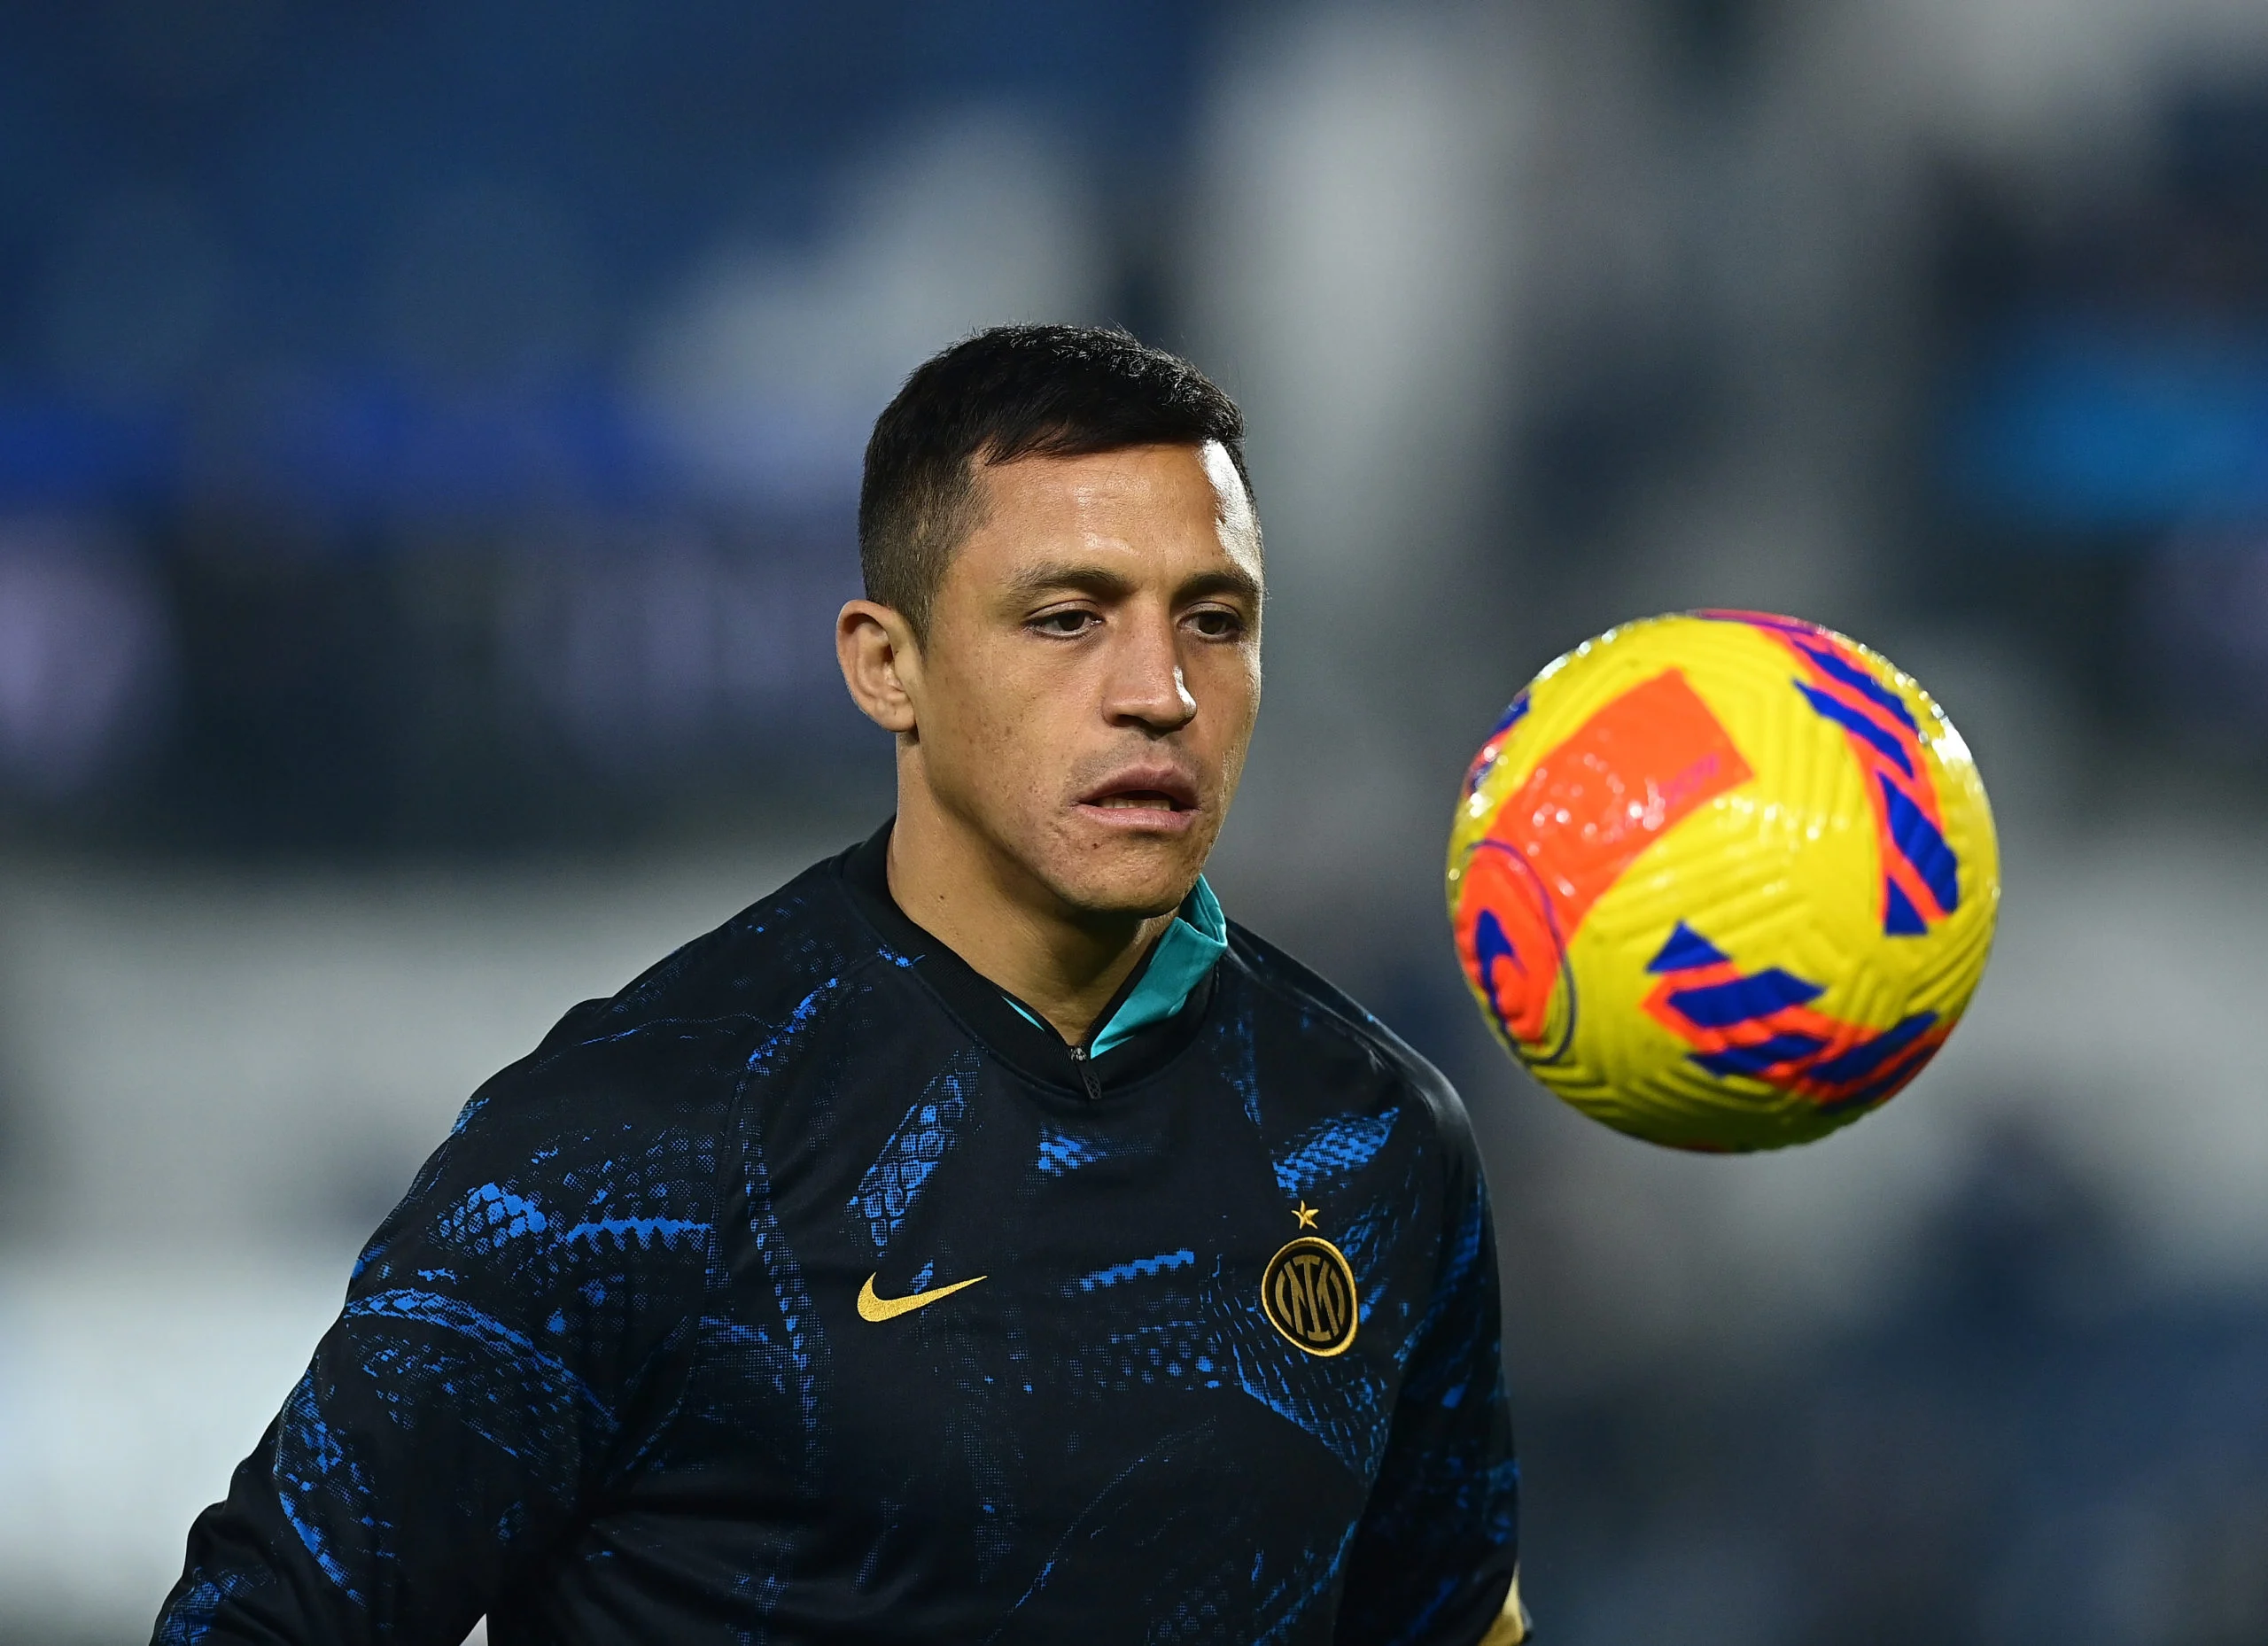 Alexis Sanchez returned to Inter in the recent summer window, signing a one-year contract, but it’s unlikely to be the final stop of his career.